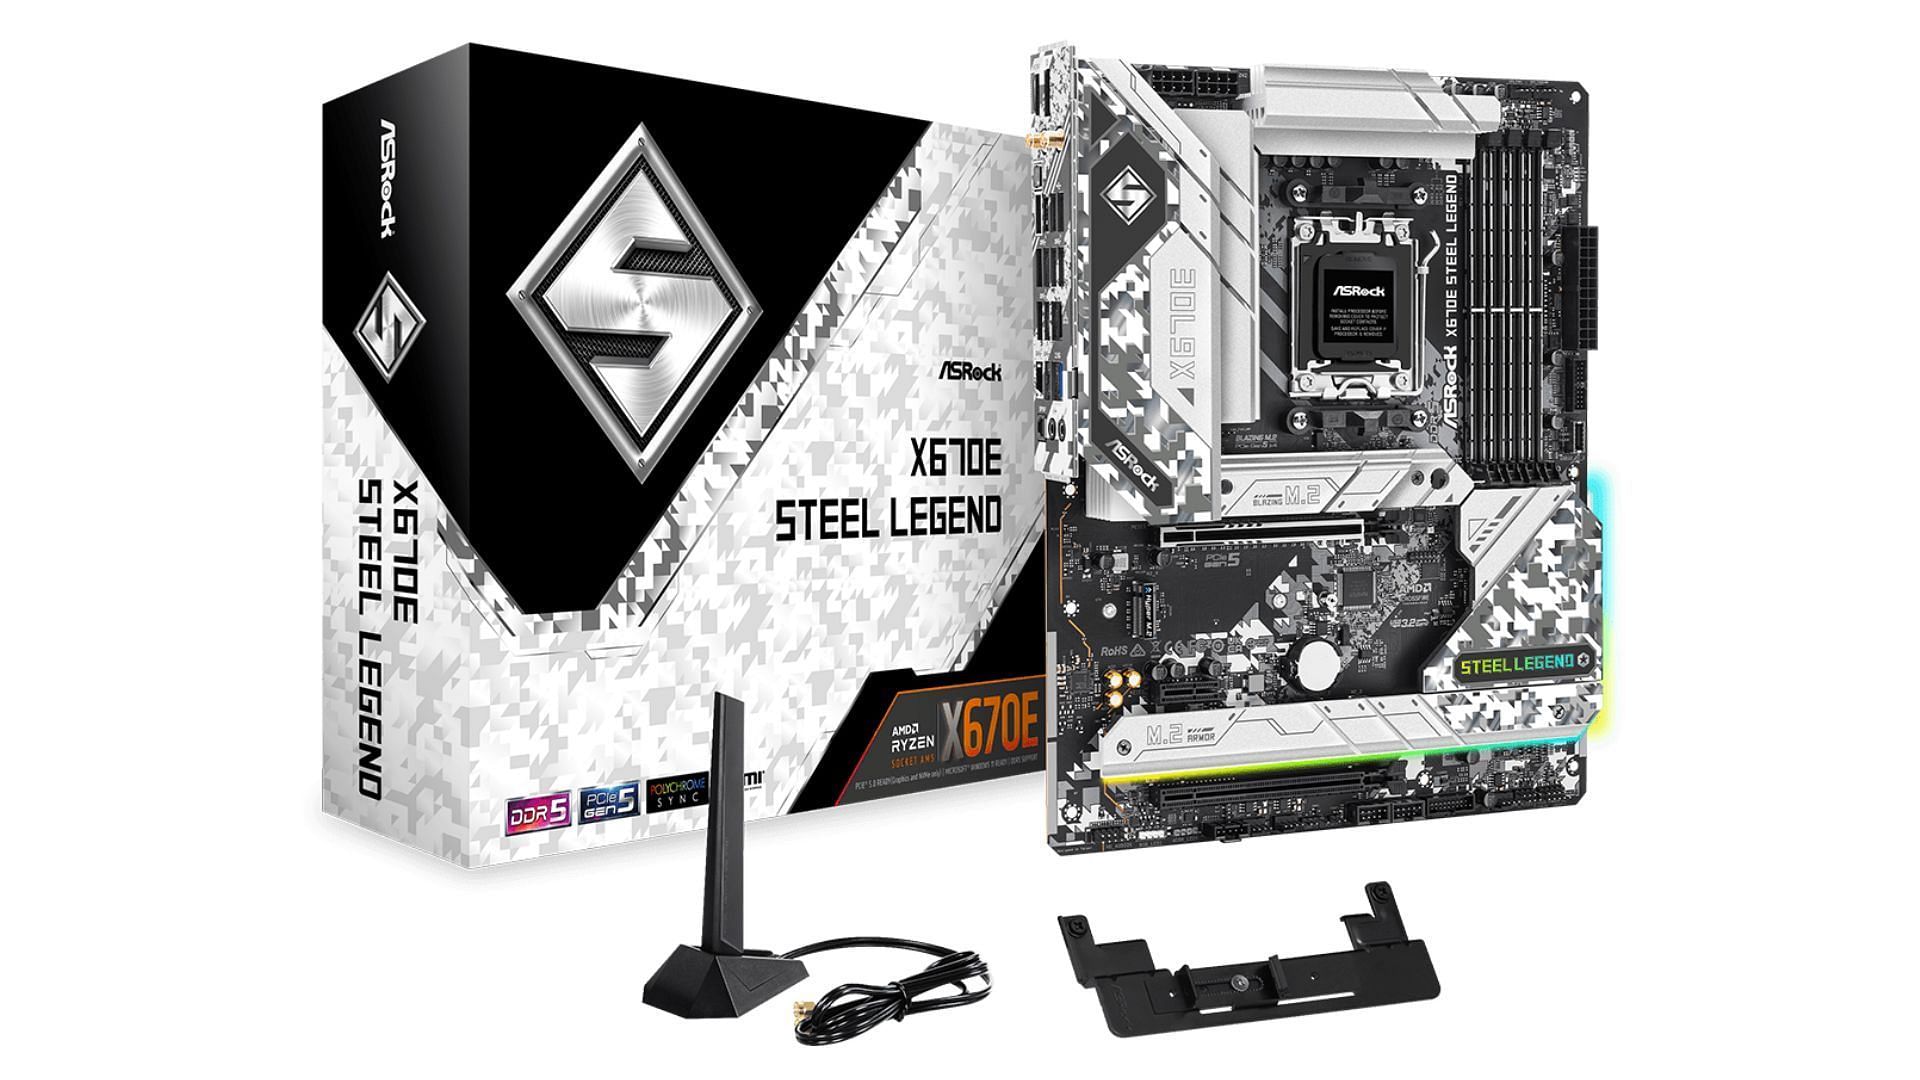 The ASRock X670E Steel Legend is another great budget-oriented motherboard from the company. (Image via ASRock)